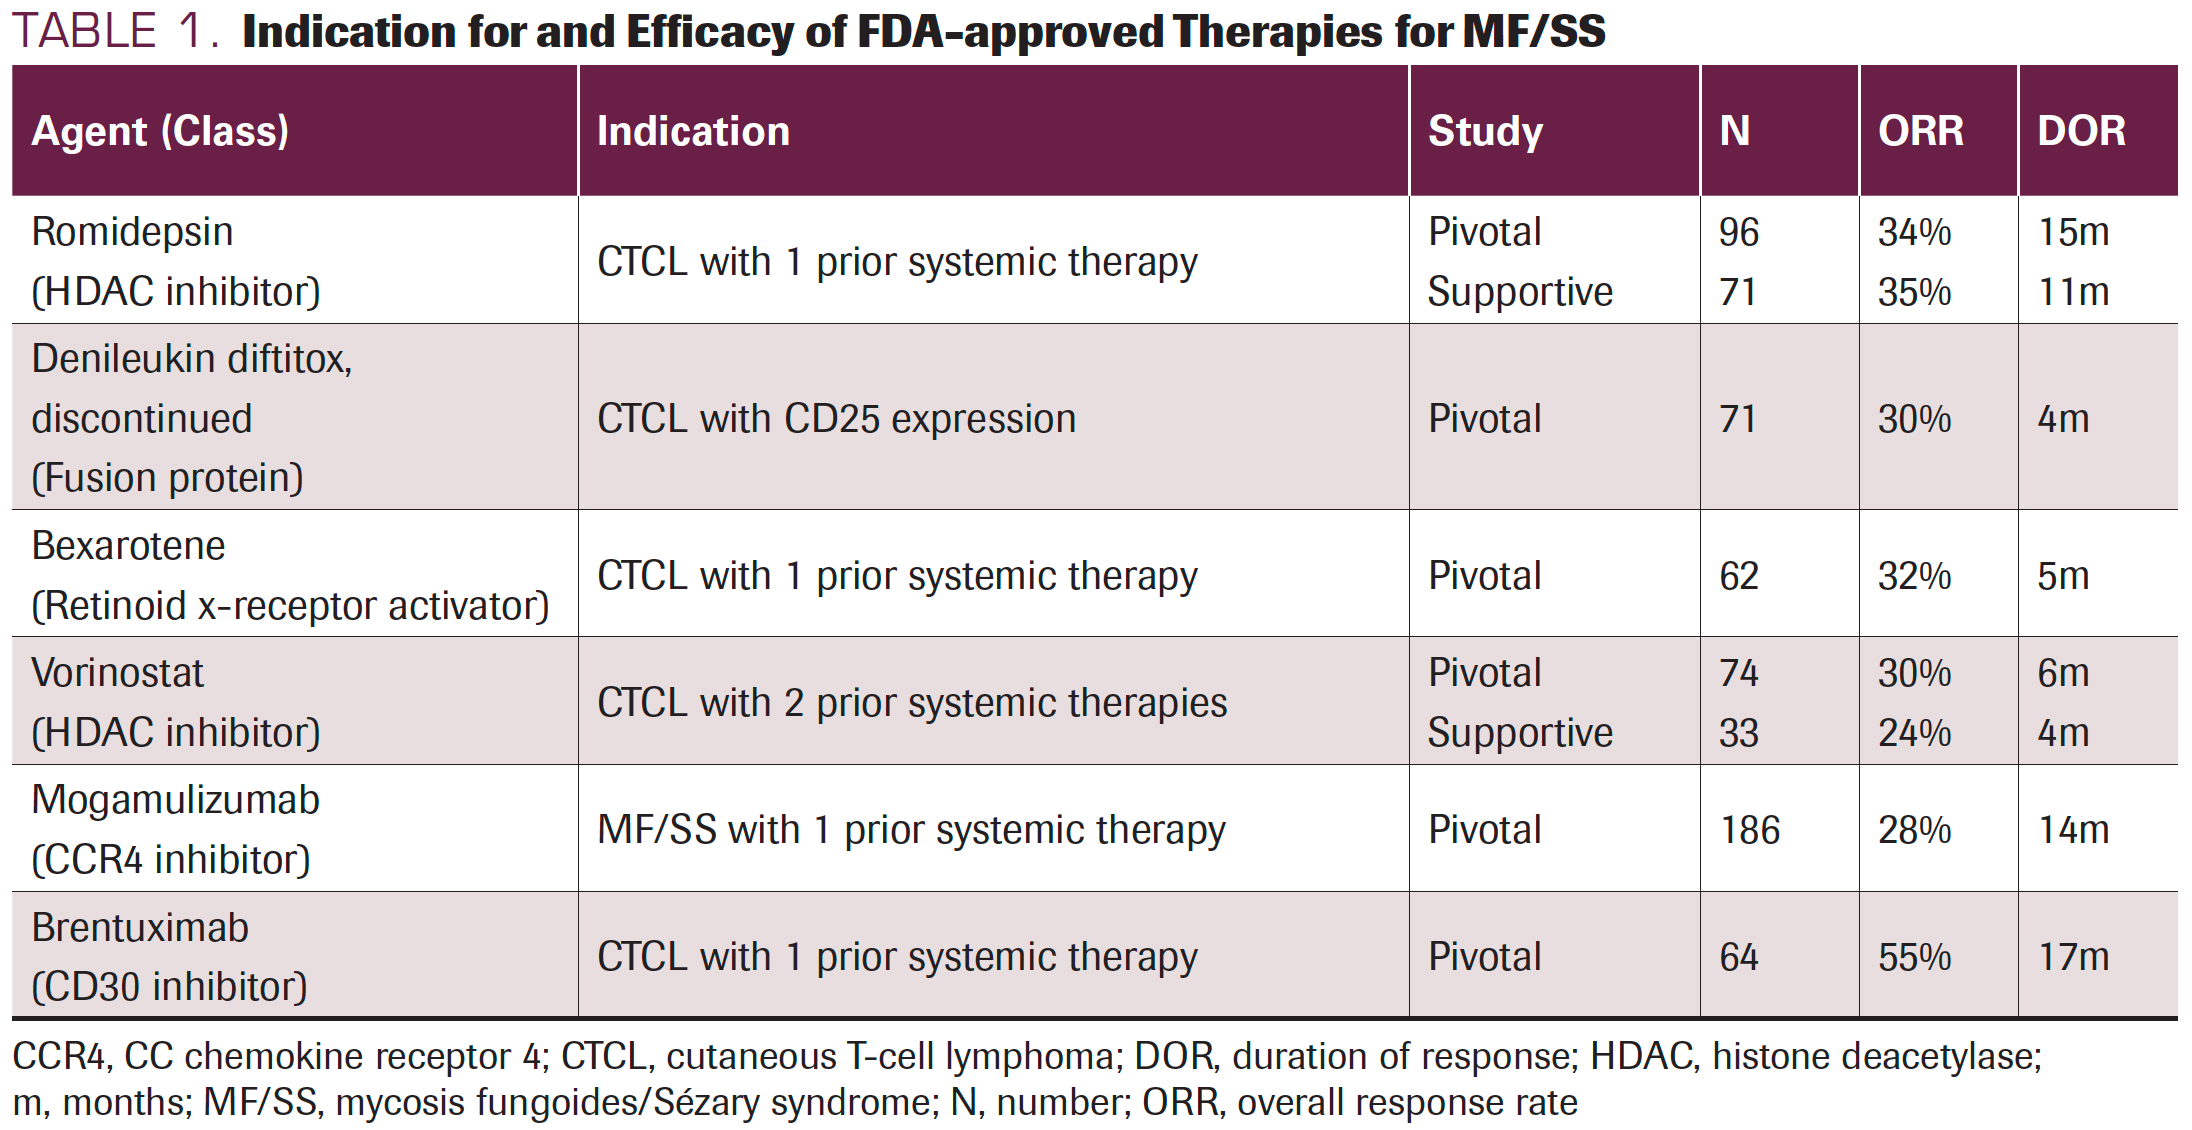 TABLE 1. Indication for and Efficacy of FDA-approved Therapies for MF/SS